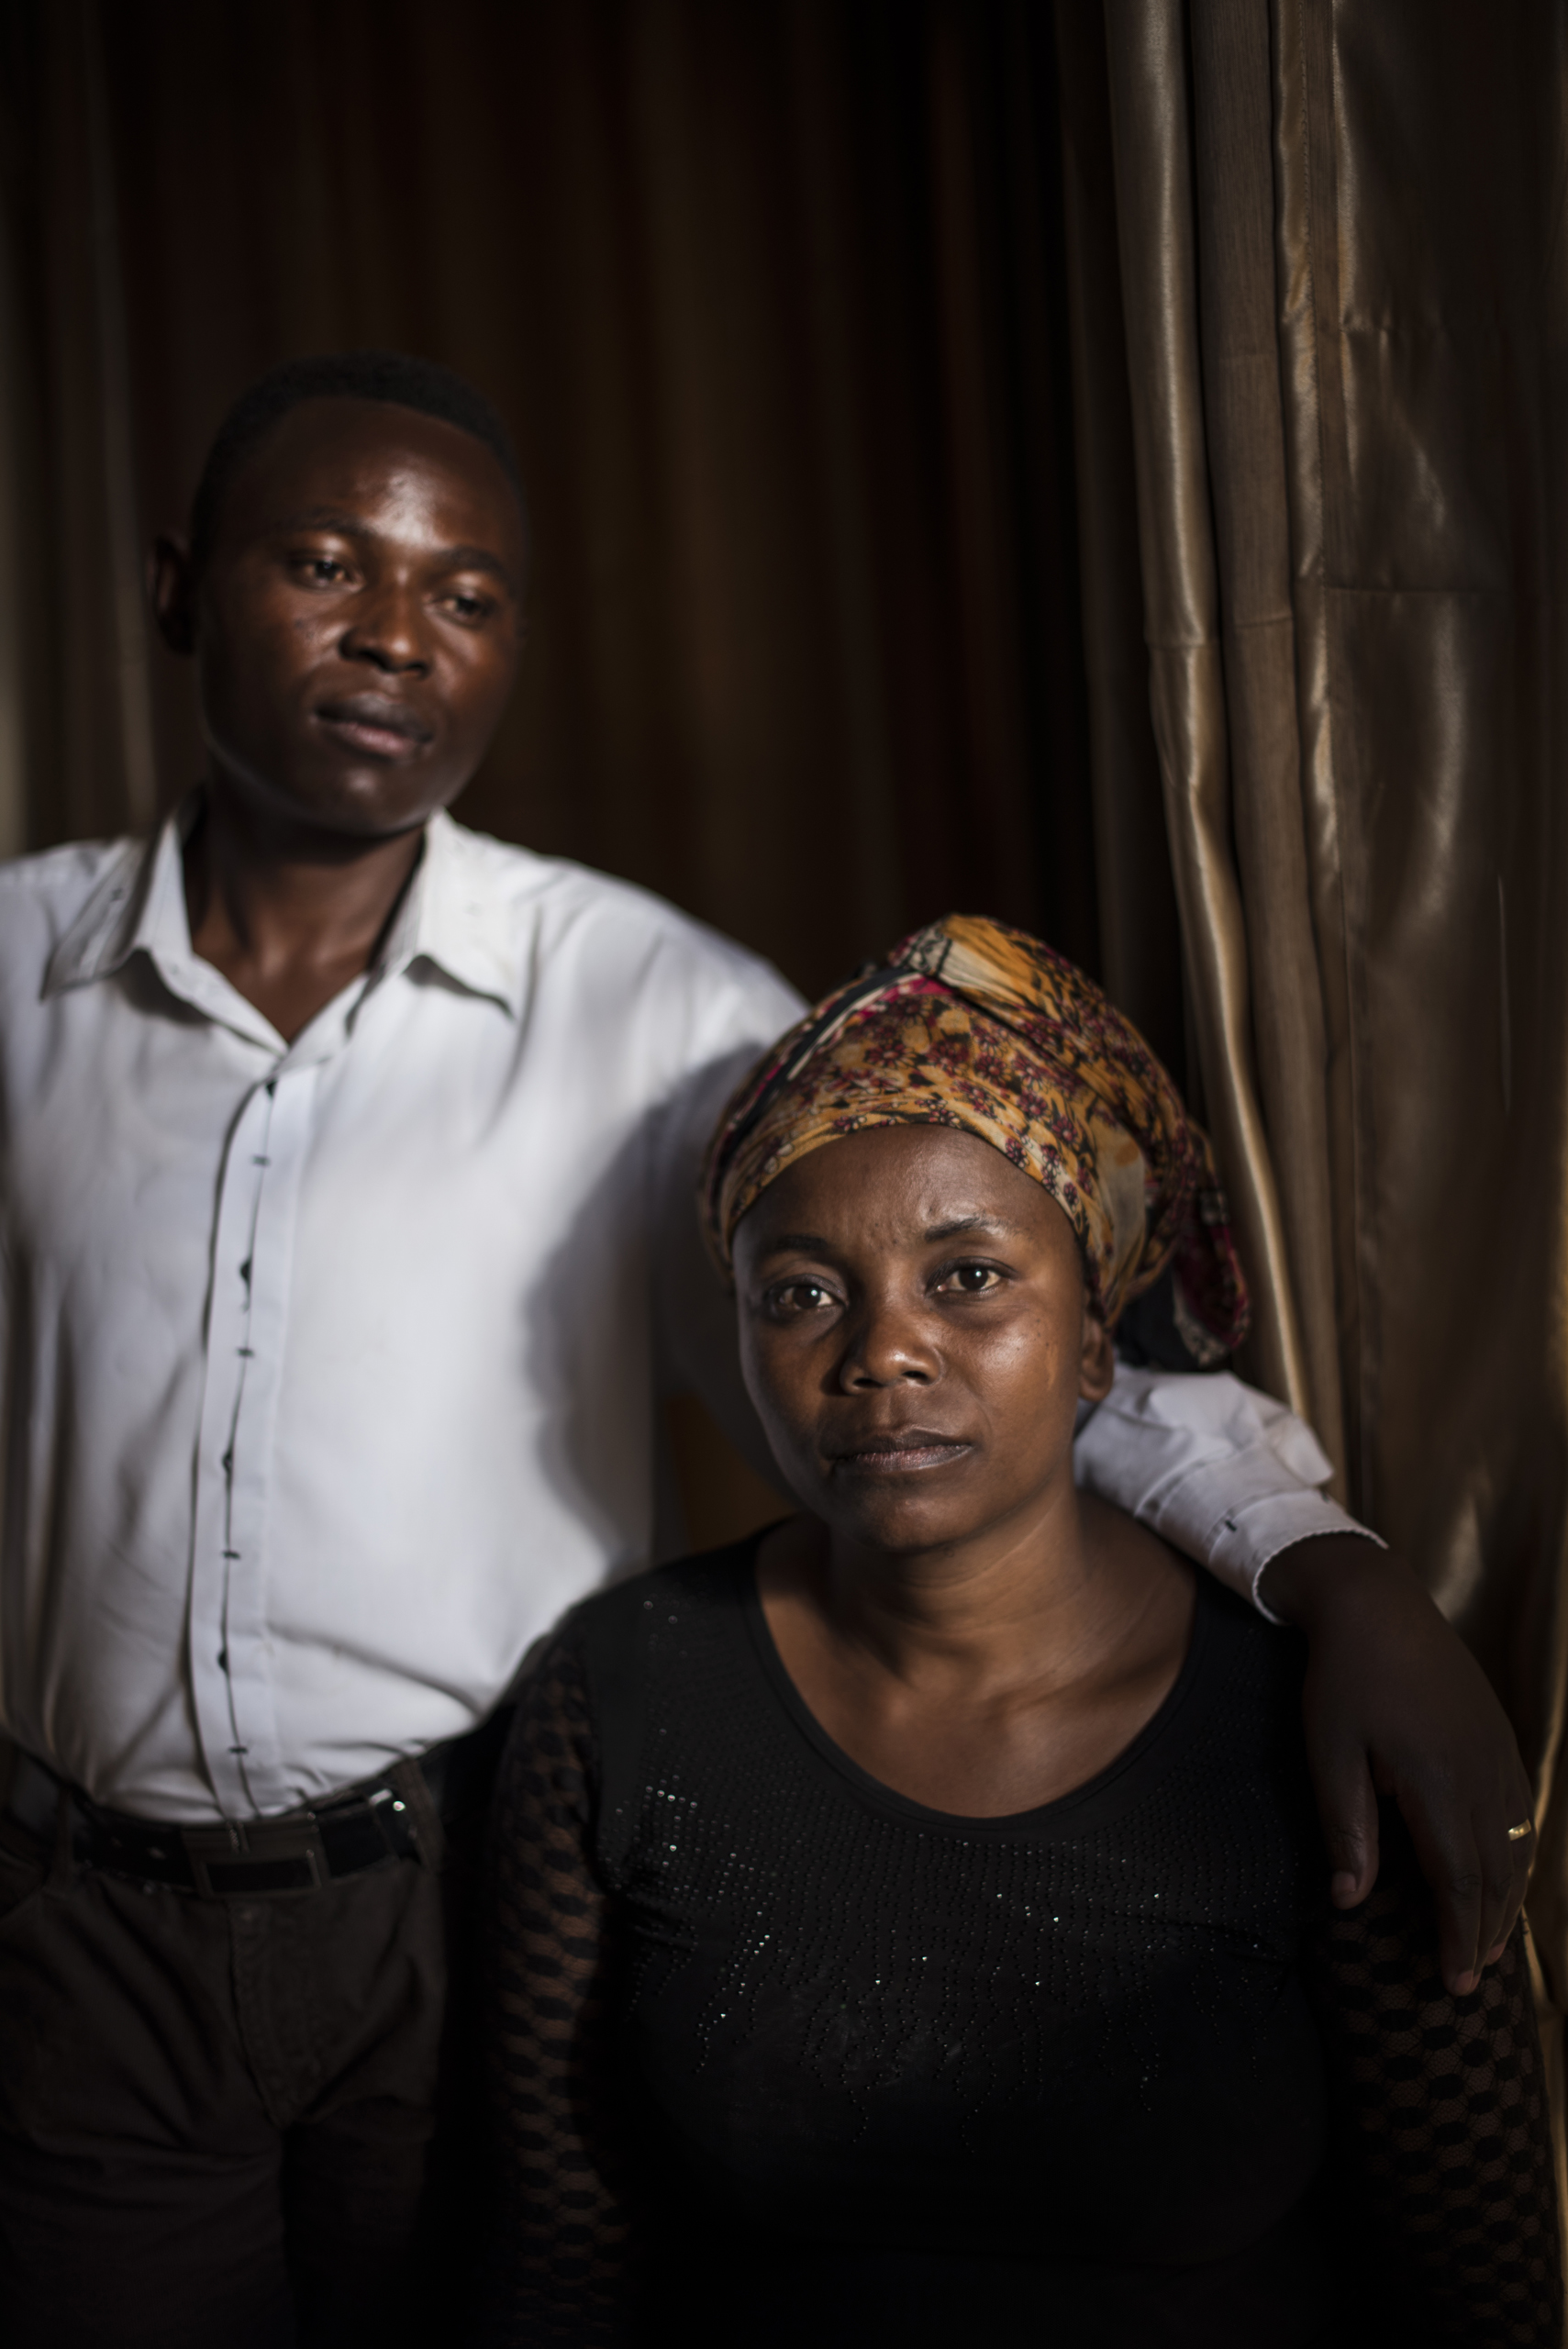 Kyalu Katentula, 40, and her husband, Abby Tagalog, 38, pose for a portrait in Goma, the Democratic Republic of Congo, Dec. 6, 2015. After Kyalu was raped, she was rejected by her husband. They were brought back together by an NGO that fosters dialogue between couples and teaches that women are not at fault for their rape.